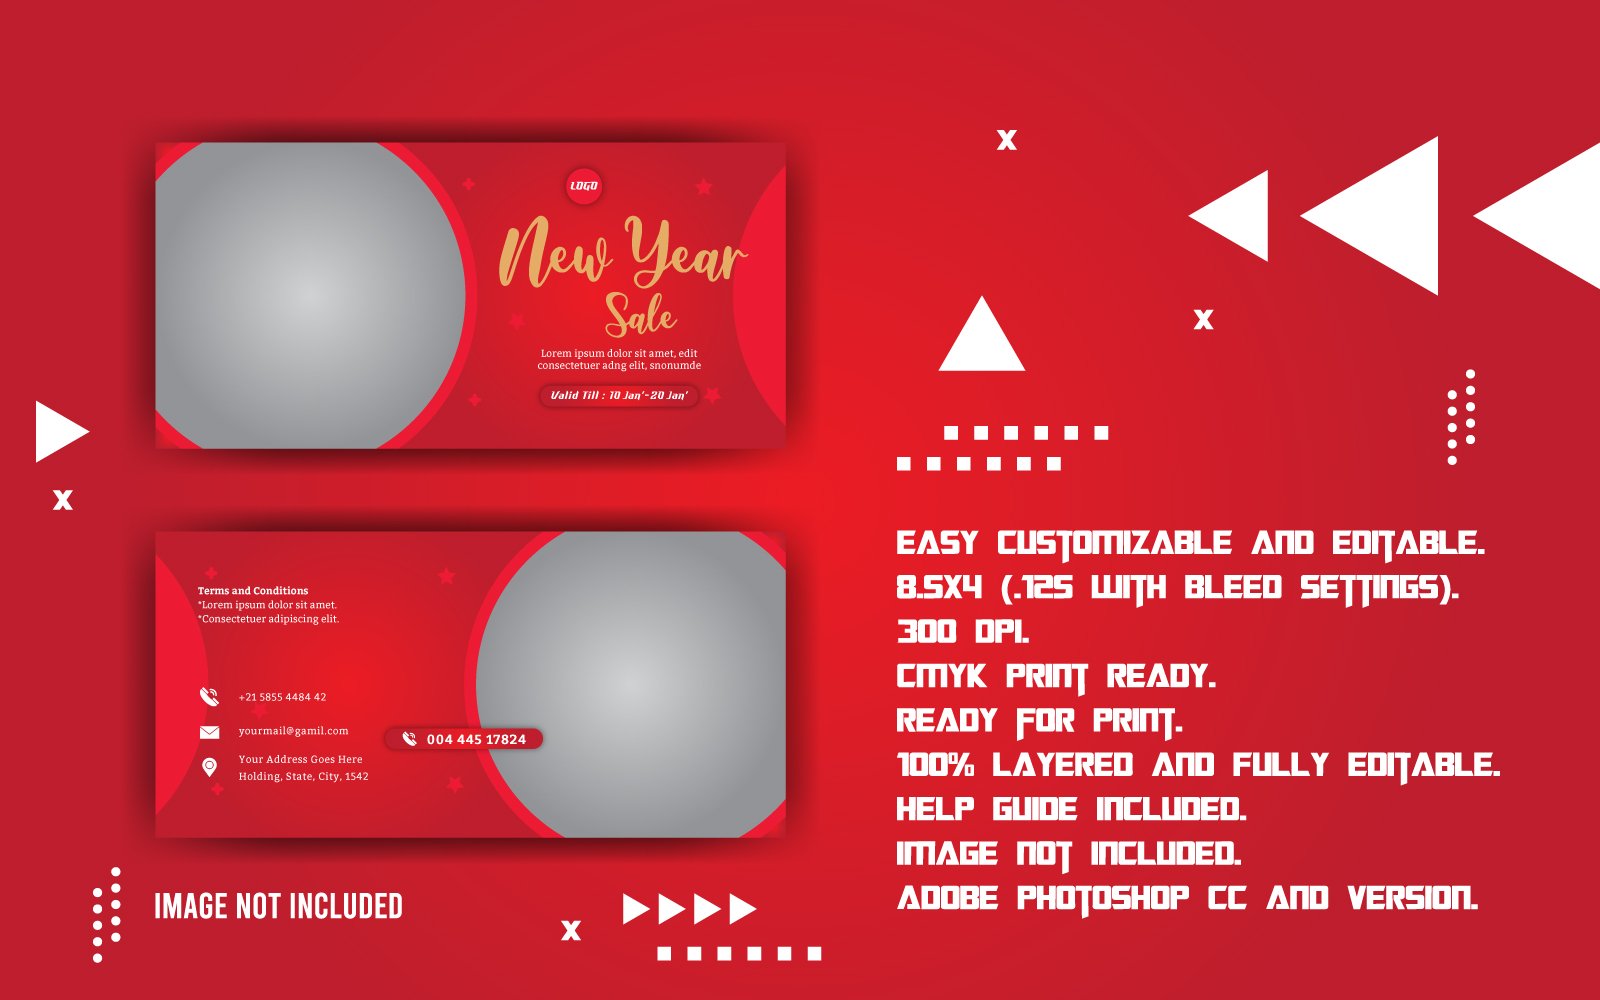 New Year Promotional Sale Voucher Corporate